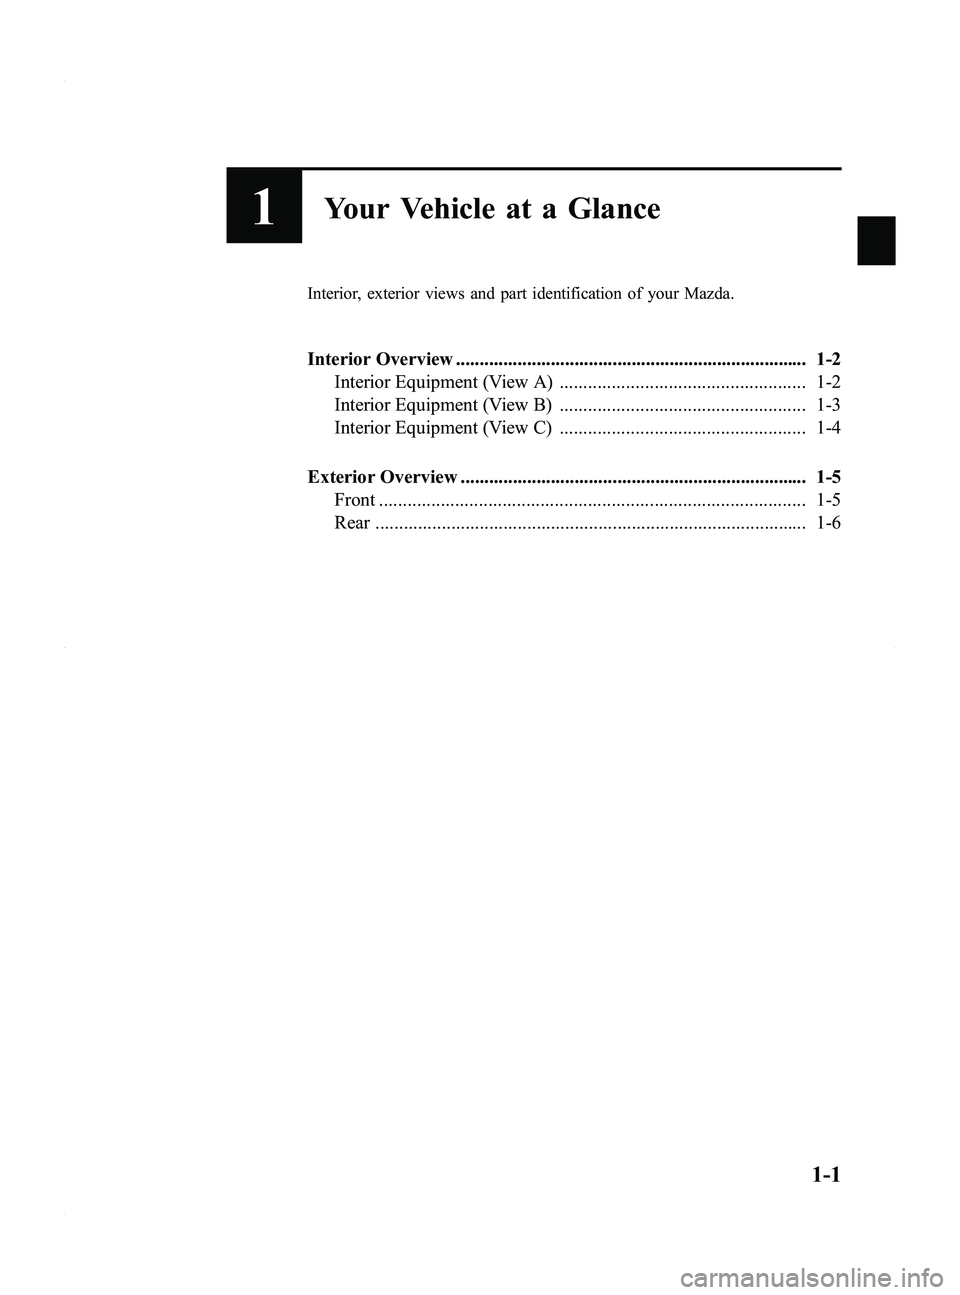 MAZDA MODEL 5 2015  Owners Manual Black plate (7,1)
1Your Vehicle at a Glance
Interior, exterior views and part identification of your Mazda.
Interior Overview ..........................................................................